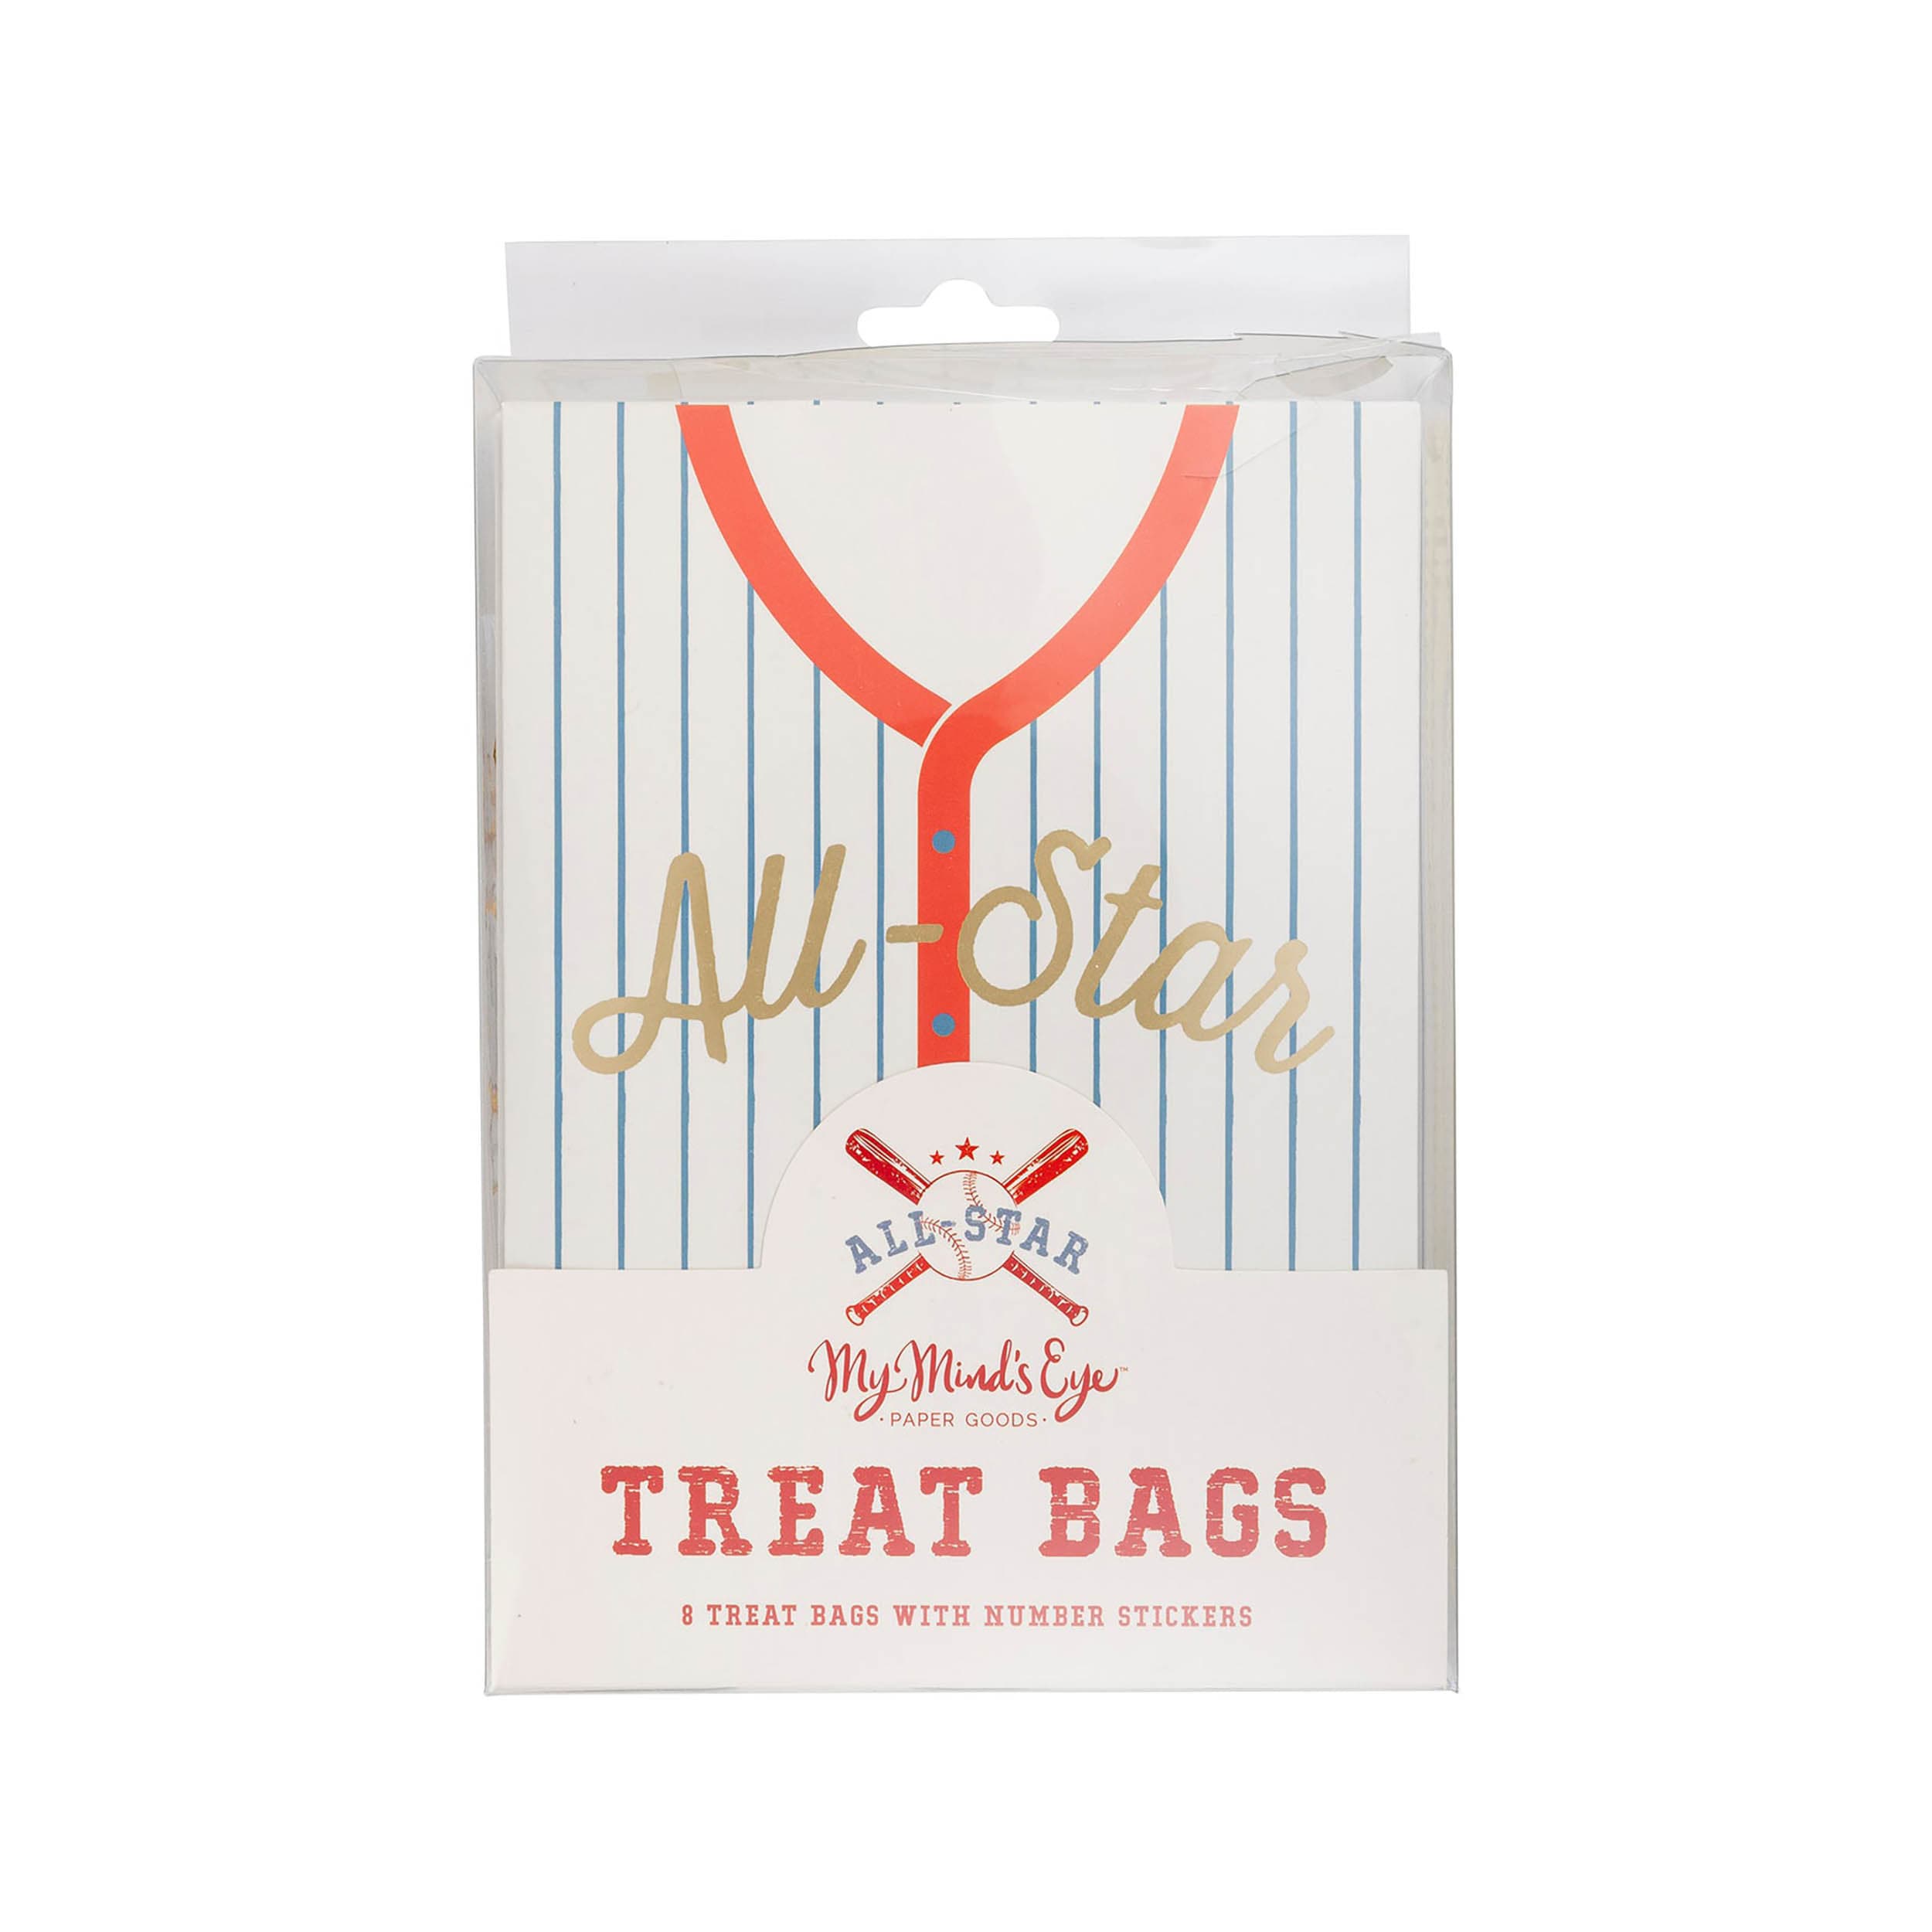 Great Party Favor Bags for a Baseball Themed Party - Set of 8